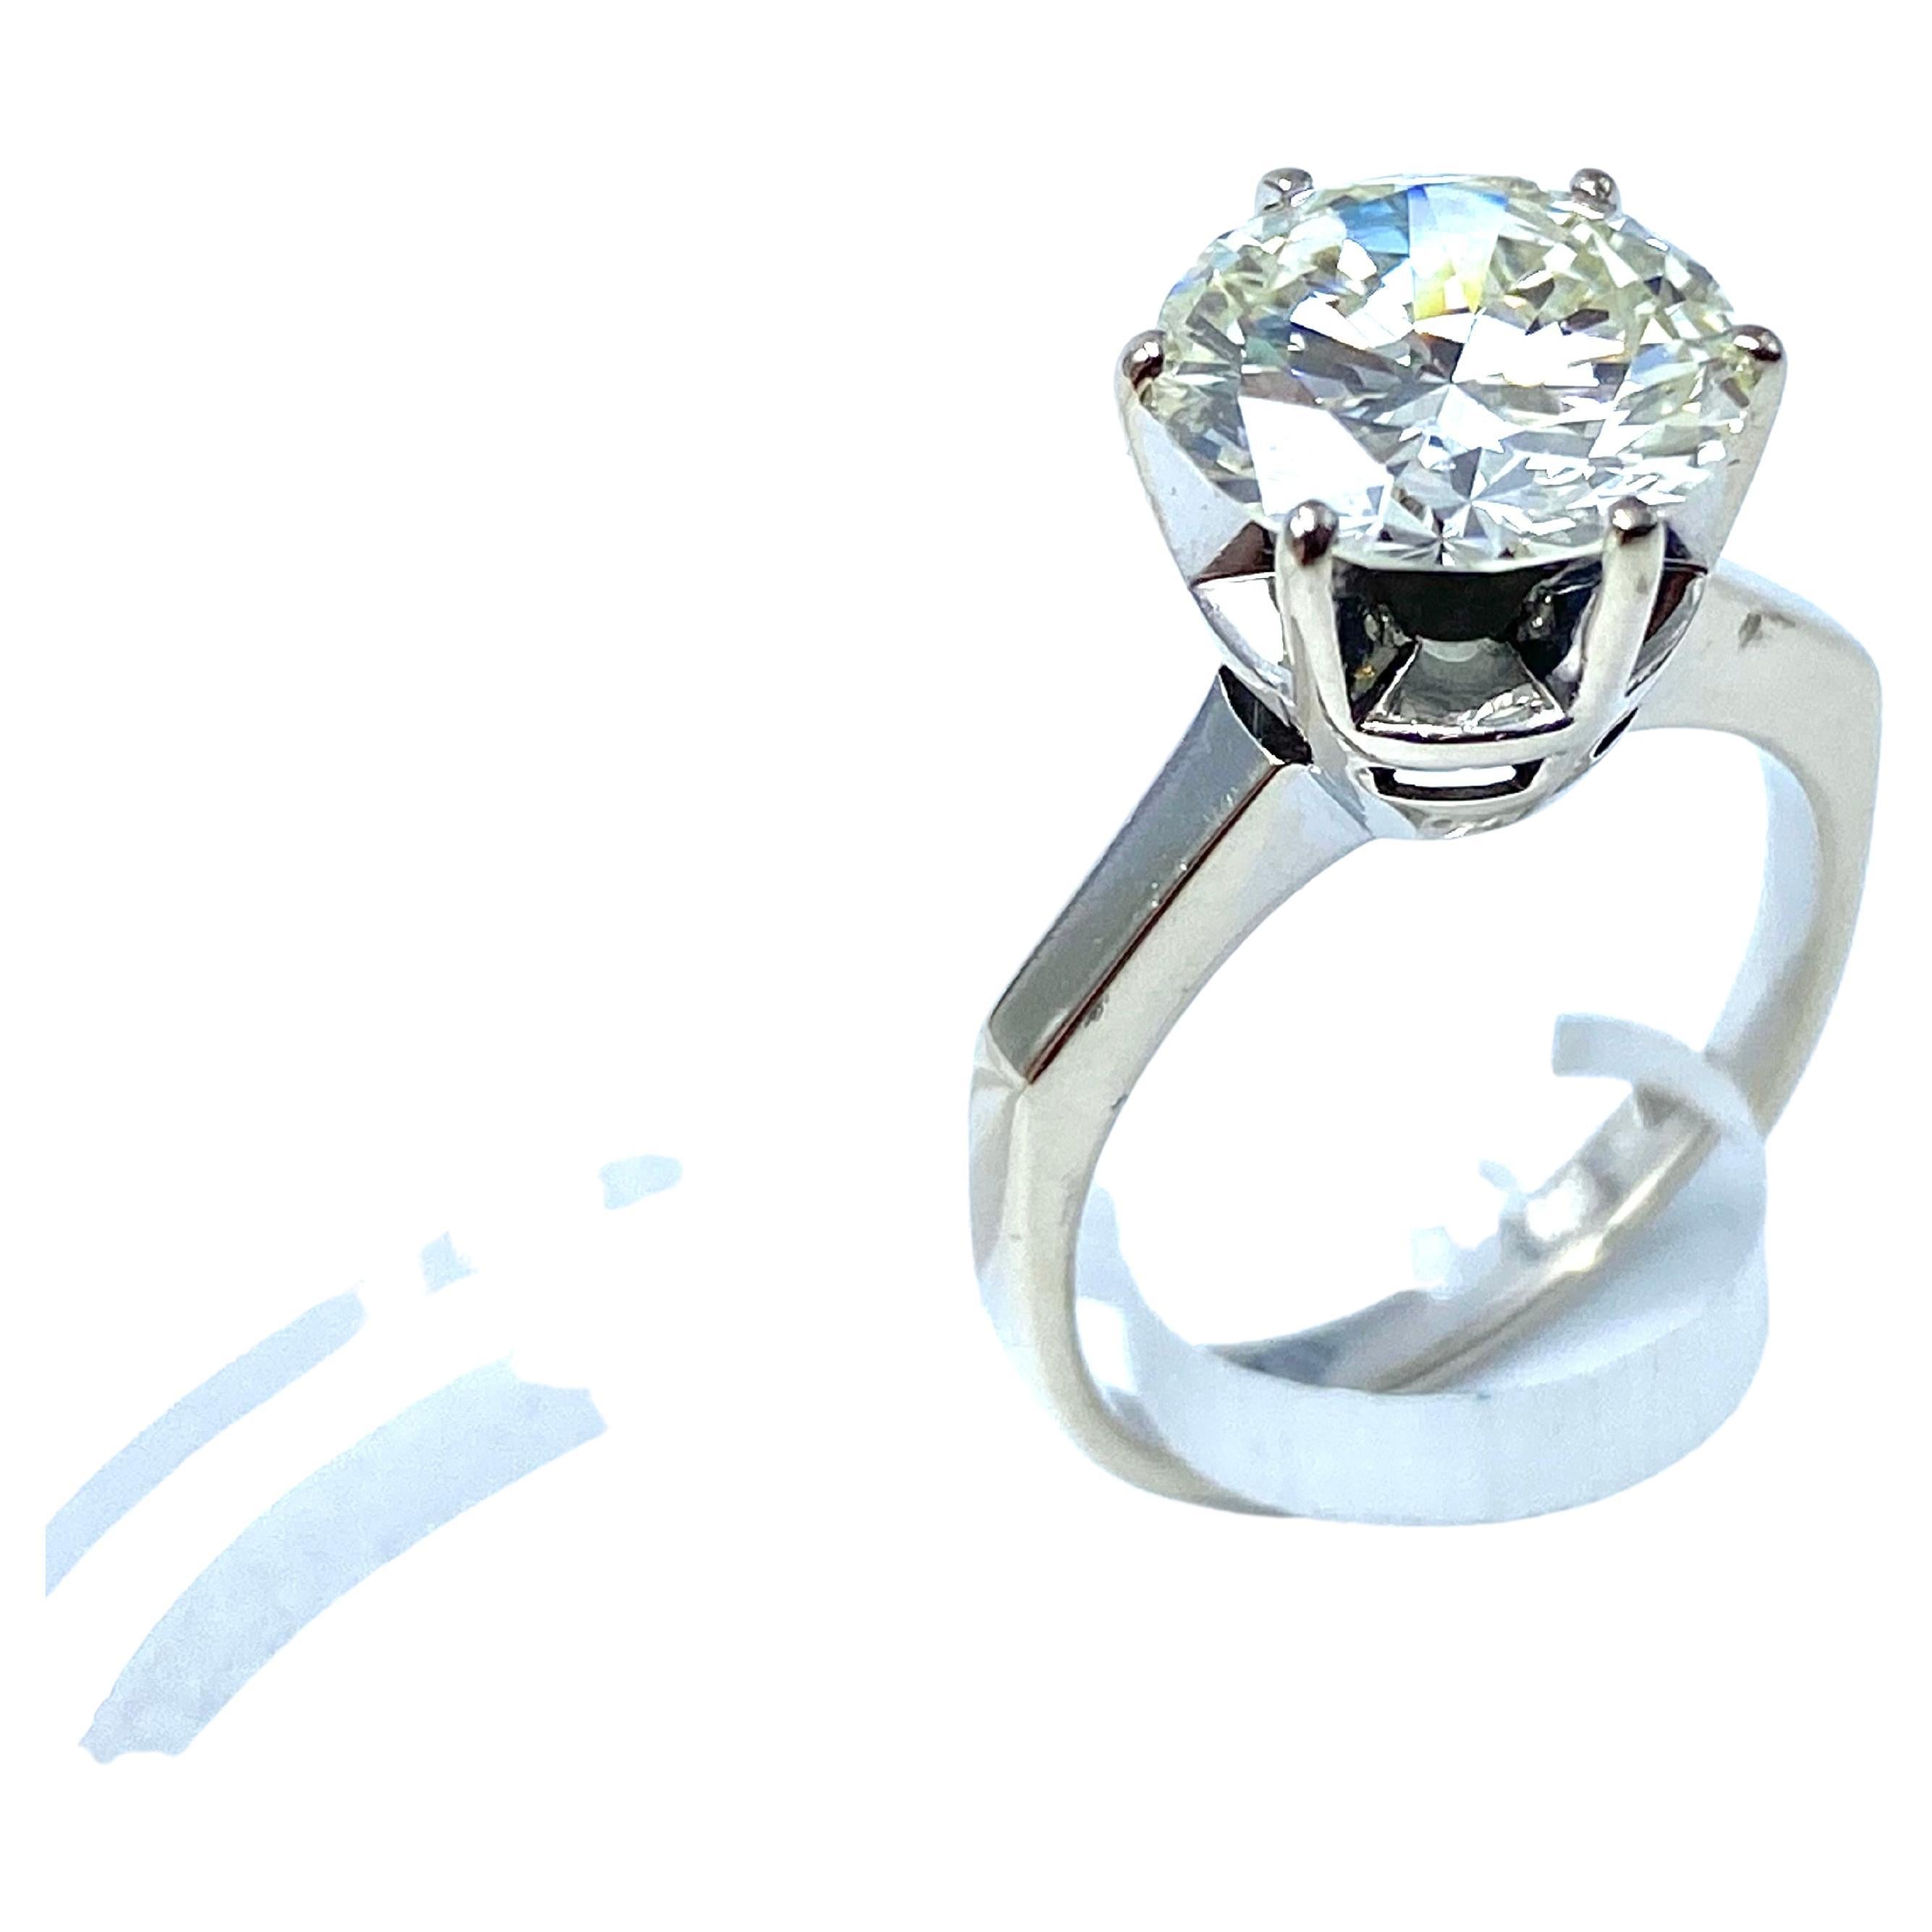 Impressive solid 18K white gold ring.
Italian production, about 1960.
Diamond ct. 3,21, J color, VS2 clarity